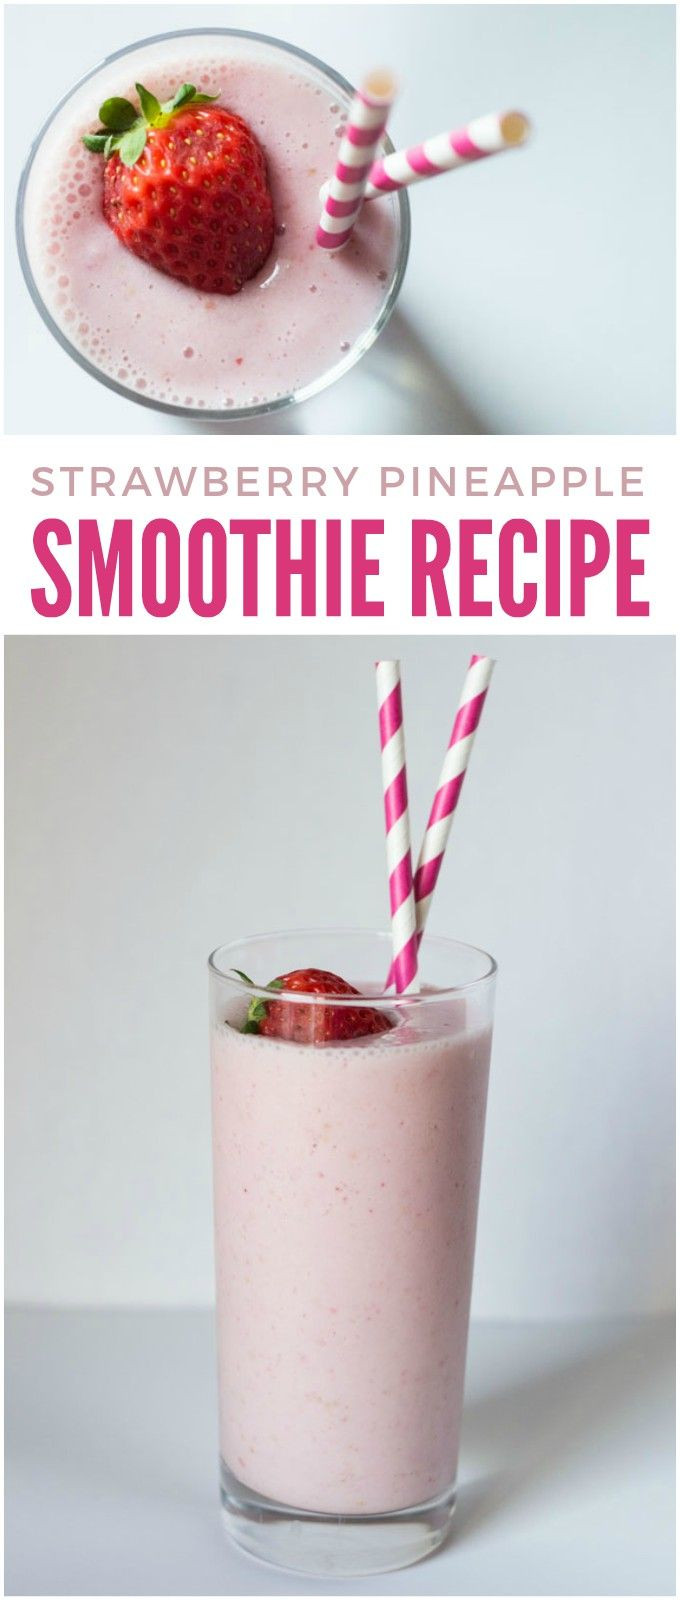 Strawberry Pineapple Smoothie Recipes
 1548 best Low Calorie Recipes images on Pinterest